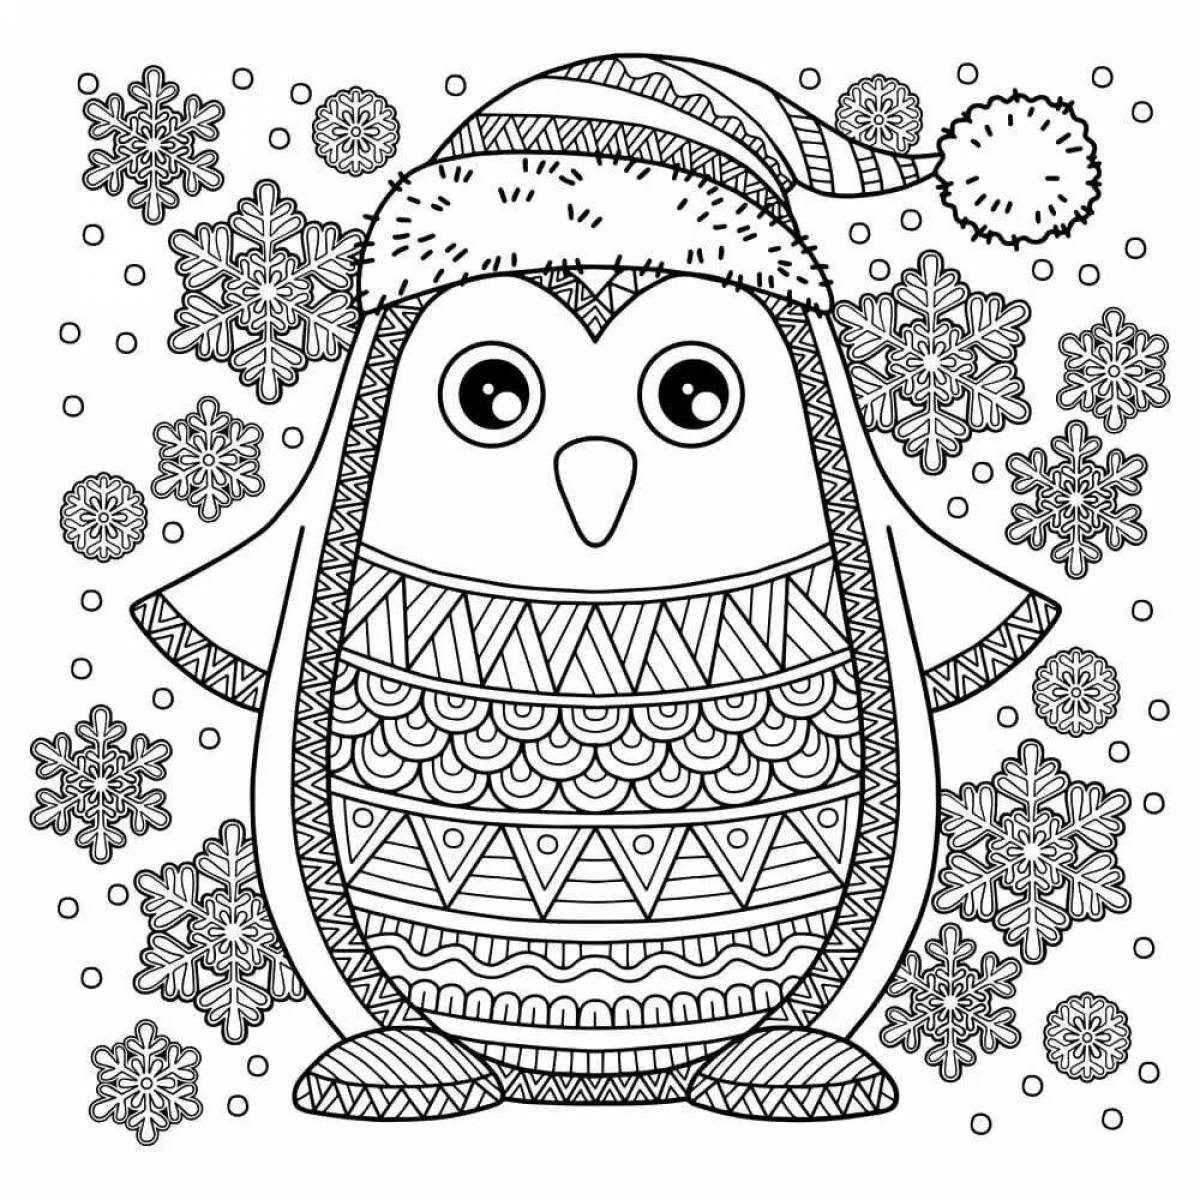 Exciting antistress winter coloring book